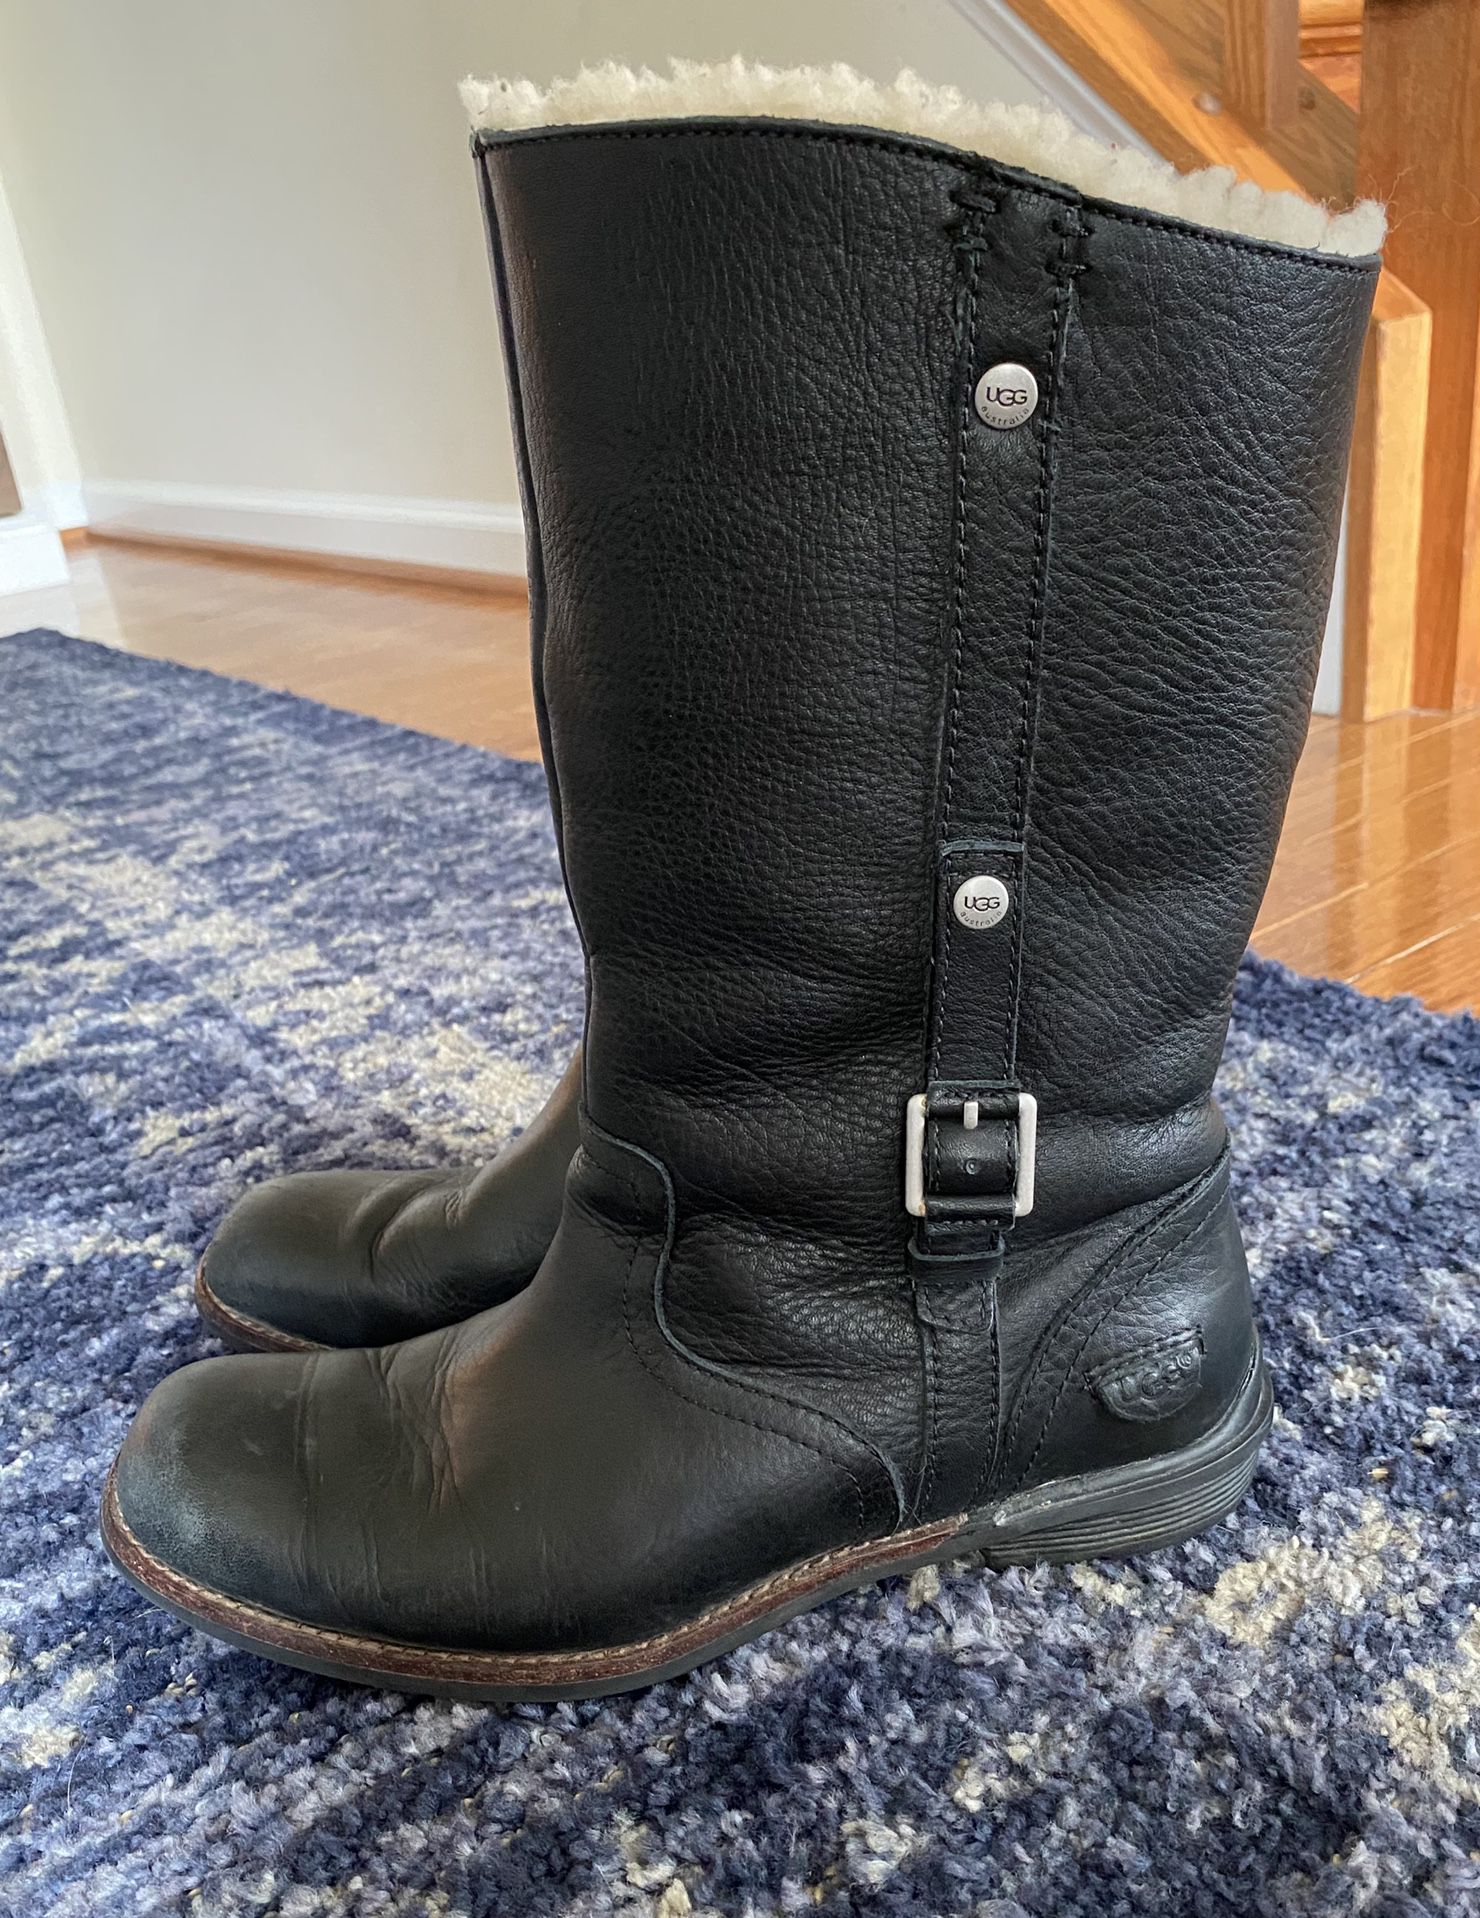 UGG Australia Women’s Leather Boots Size 8